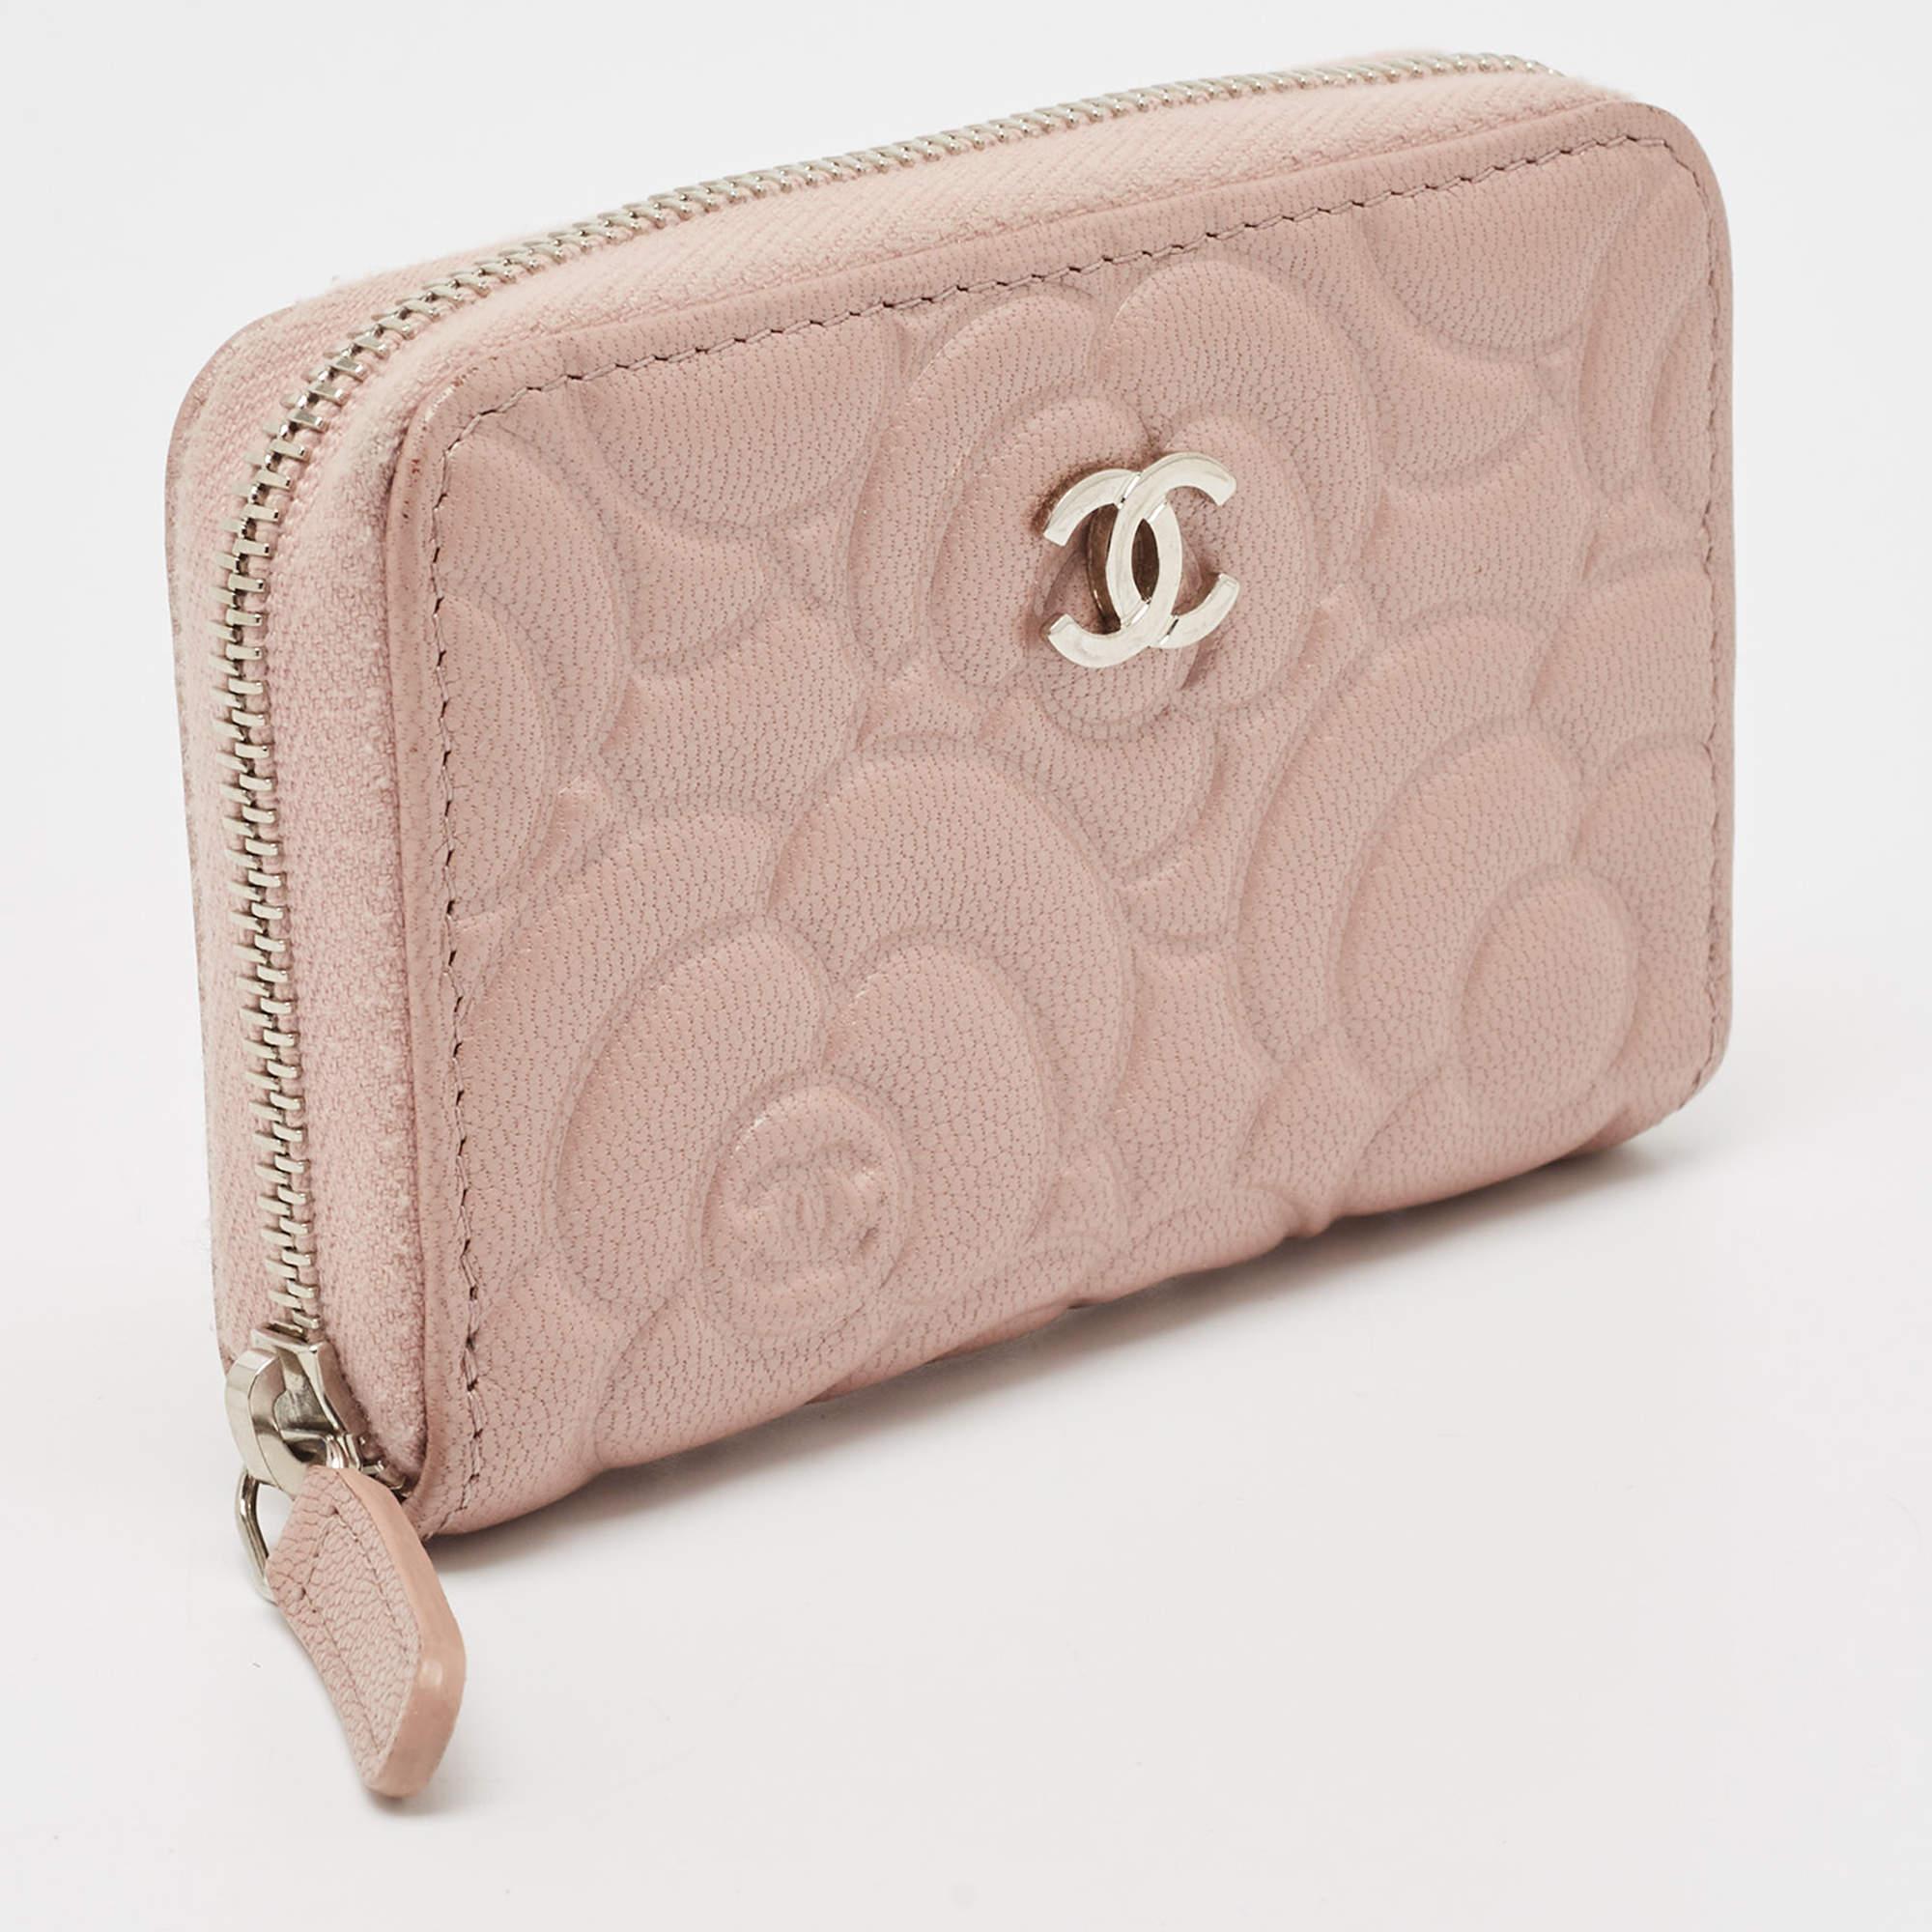 This coin purse from Chanel is made from Camellia-quilted leather. In a pink shade, with fine stitching that blends into the grand finish, the case is secured with a zipper and finished with the CC logo. A classic luxury creation.

Includes
Original